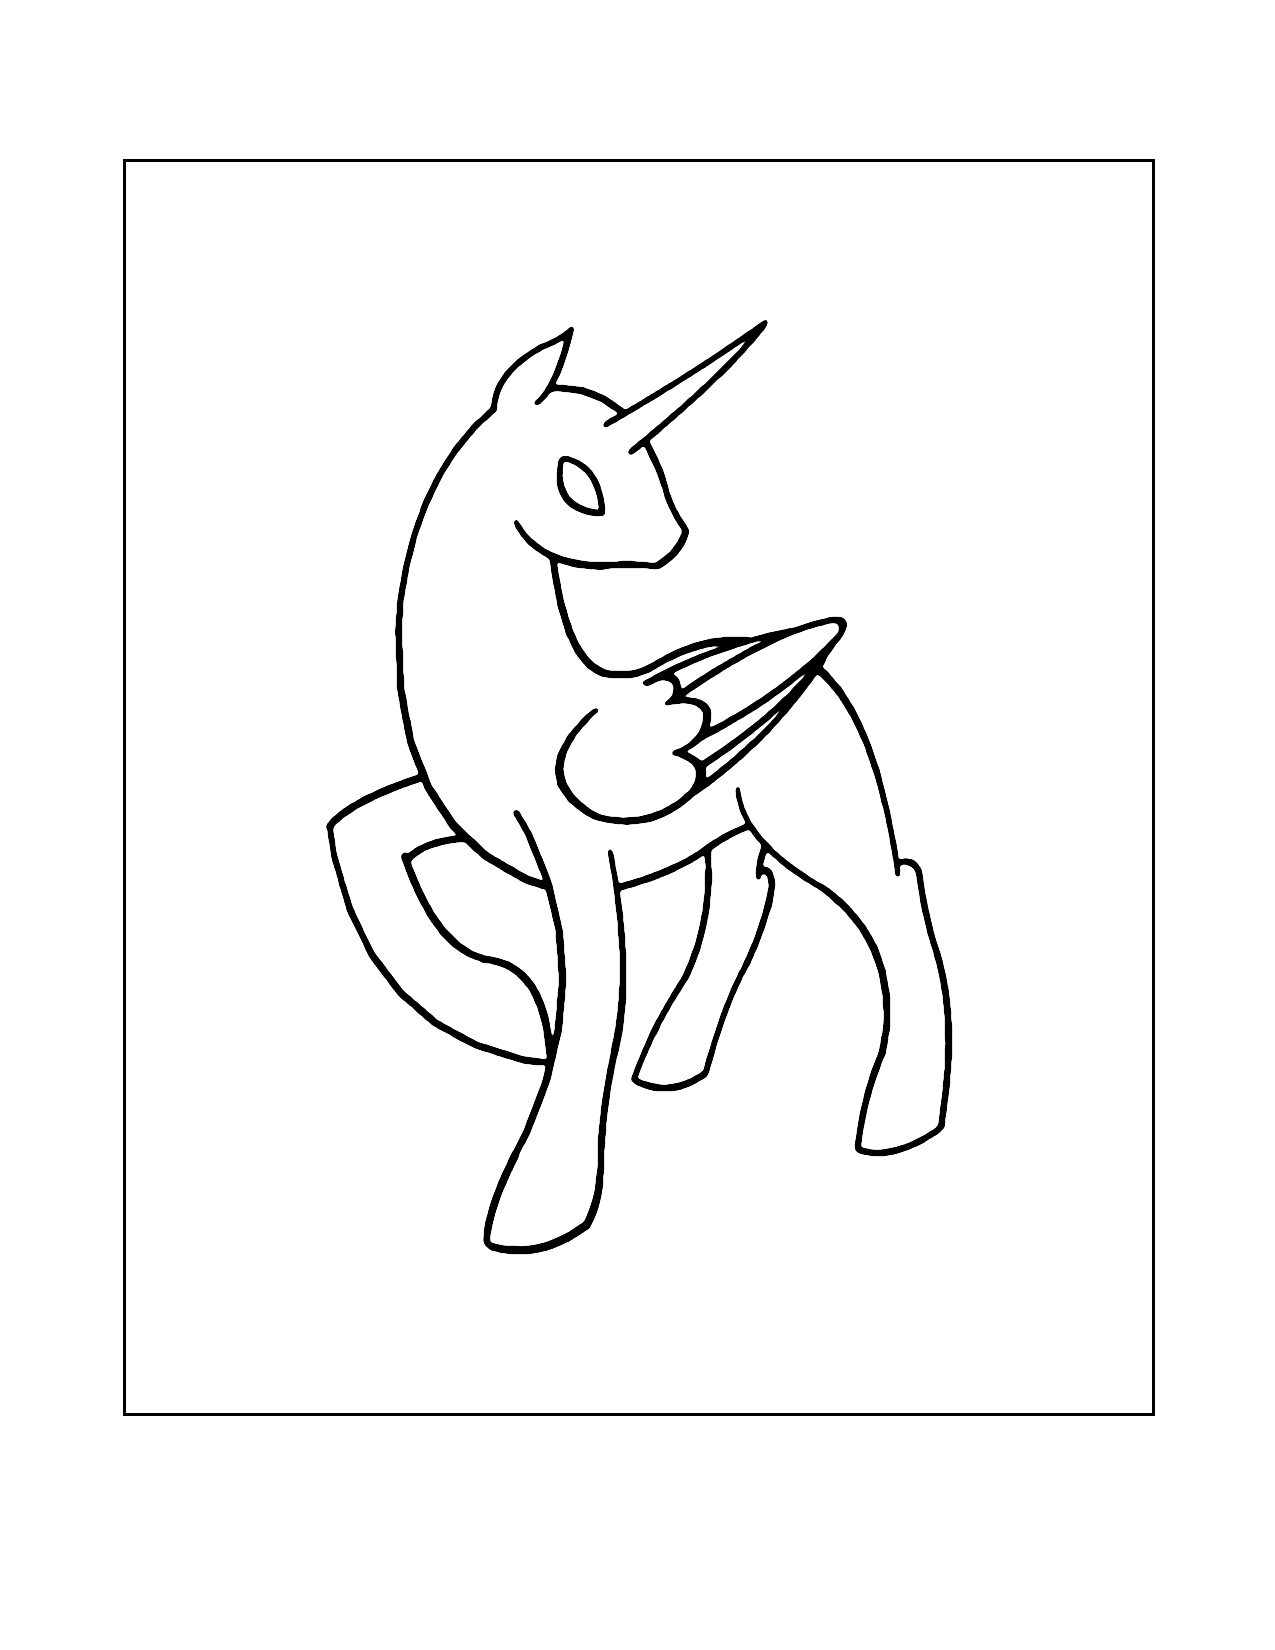 Sleek Young Alicorn Coloring Page